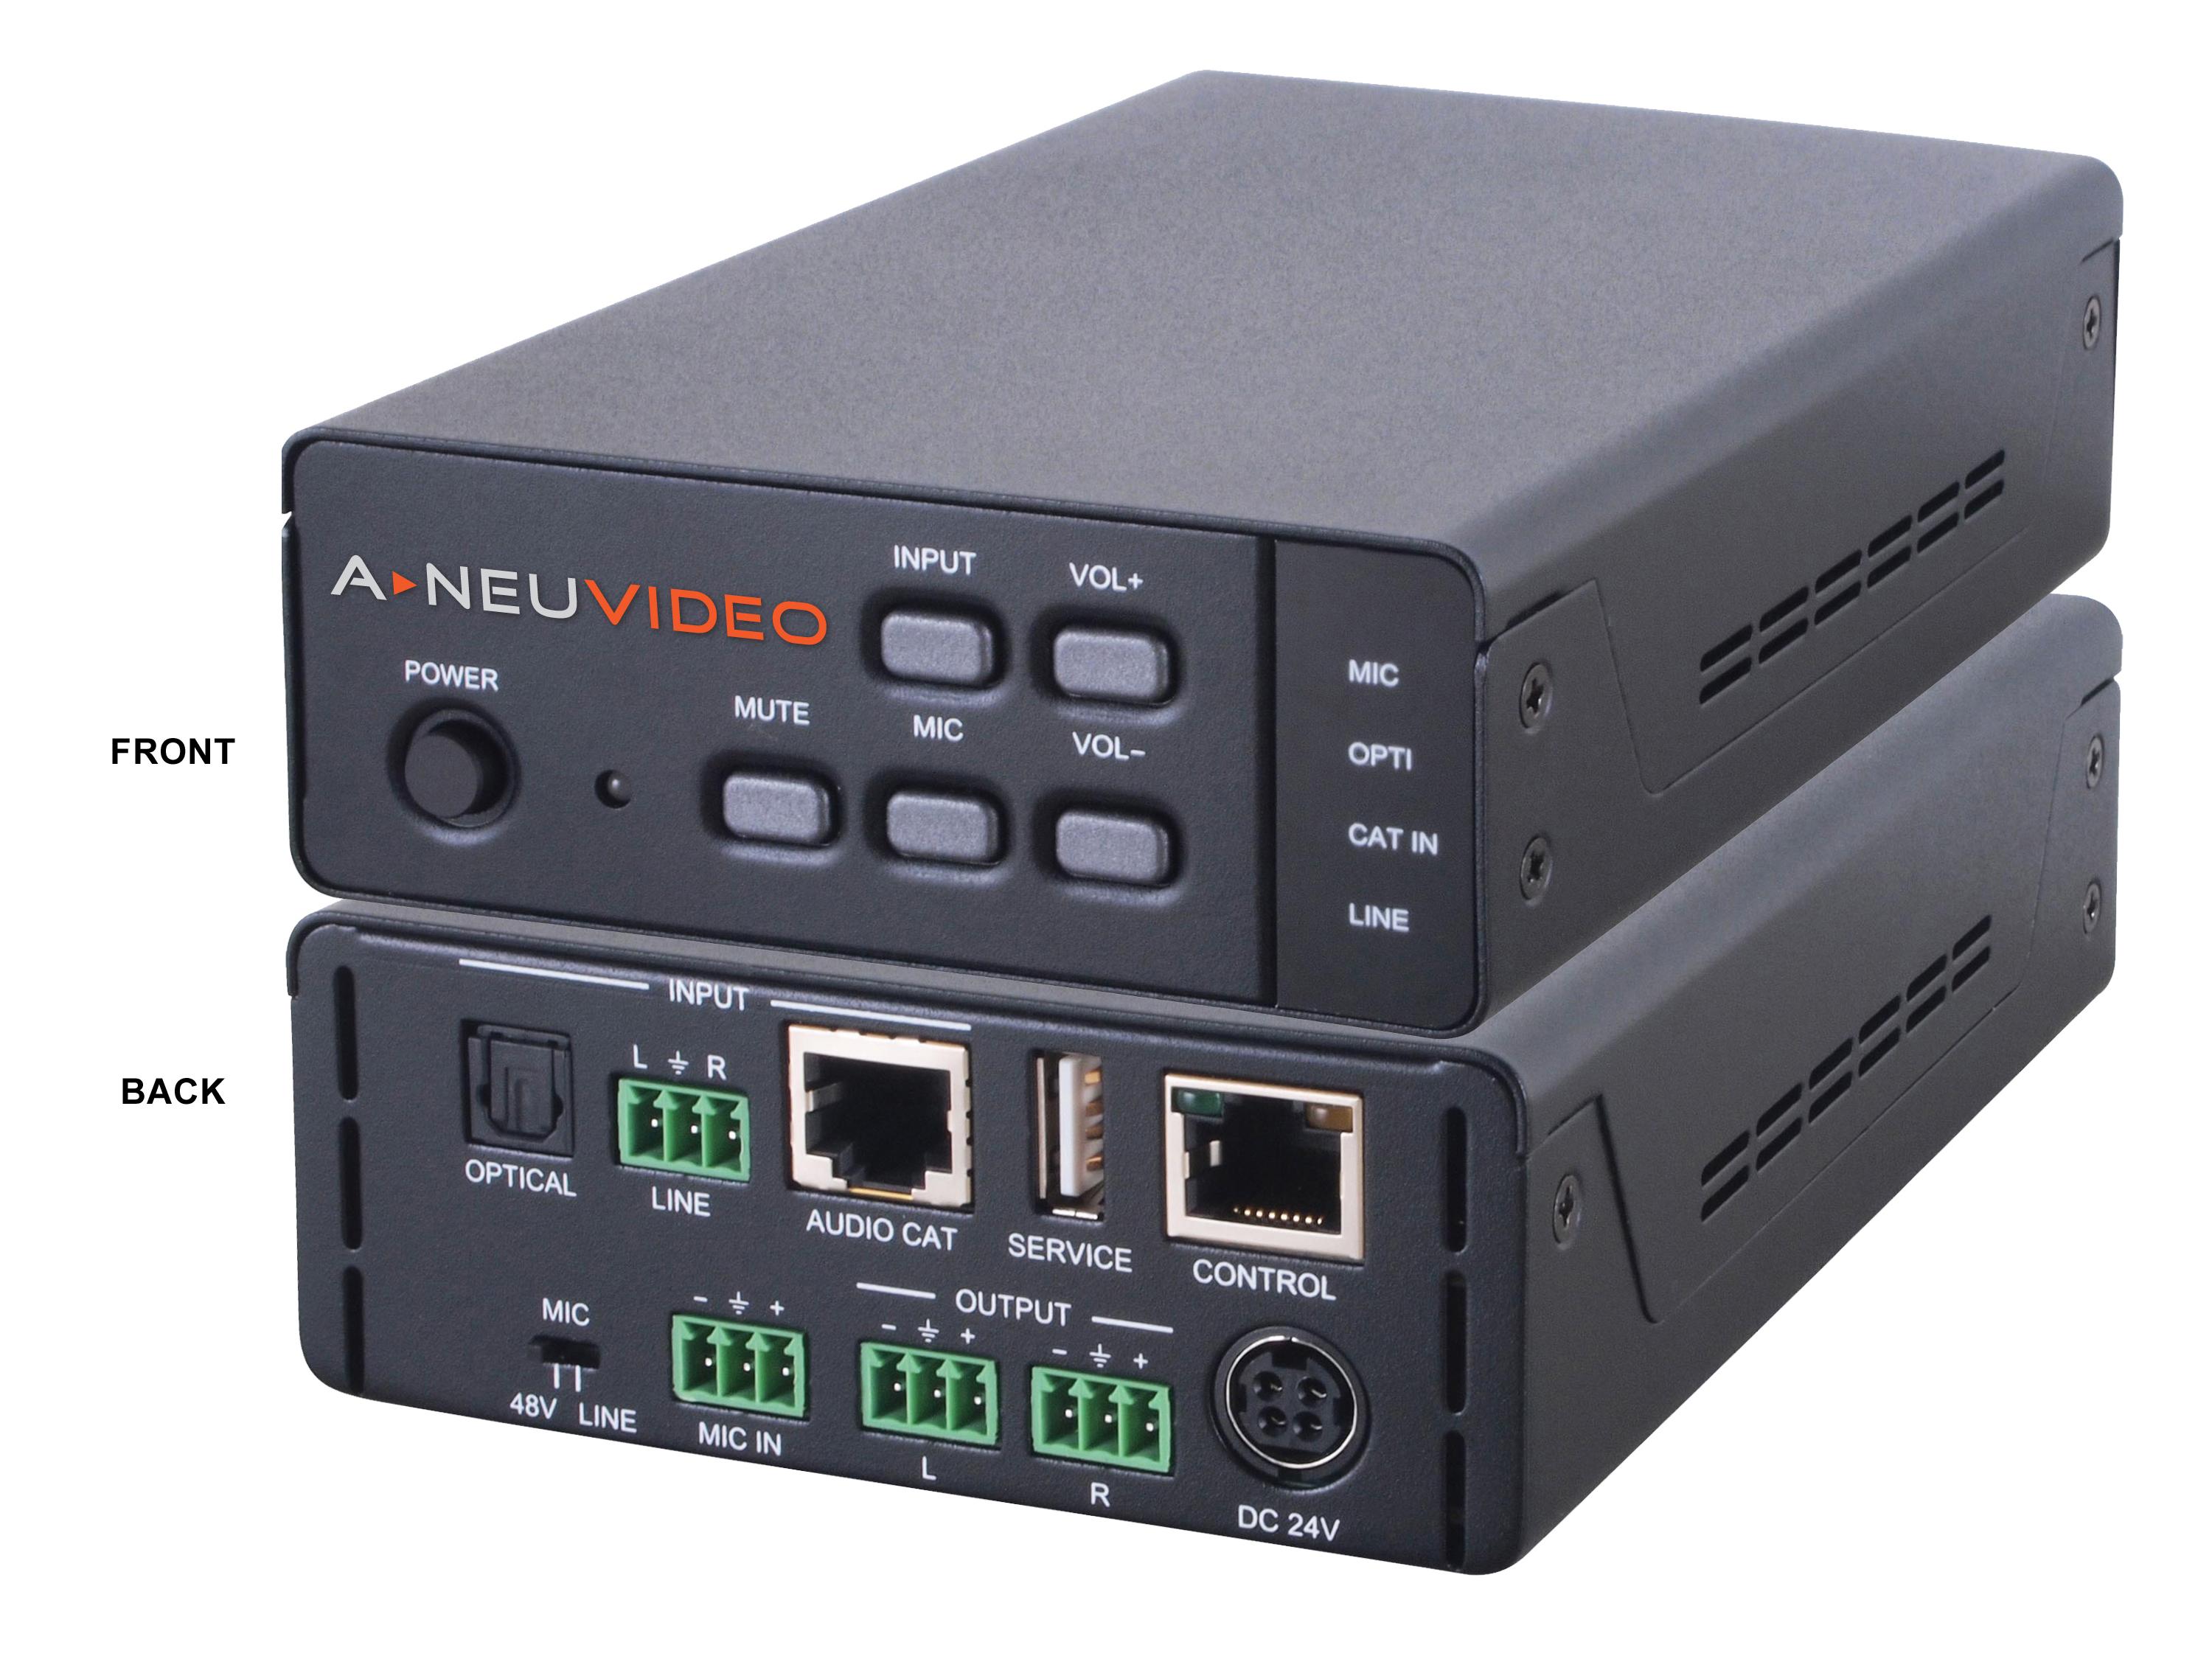 A-NeuVideo ANI-AD100 100W Amplifier with LR/Optical/Microphone/CATx and Built-In Mixer